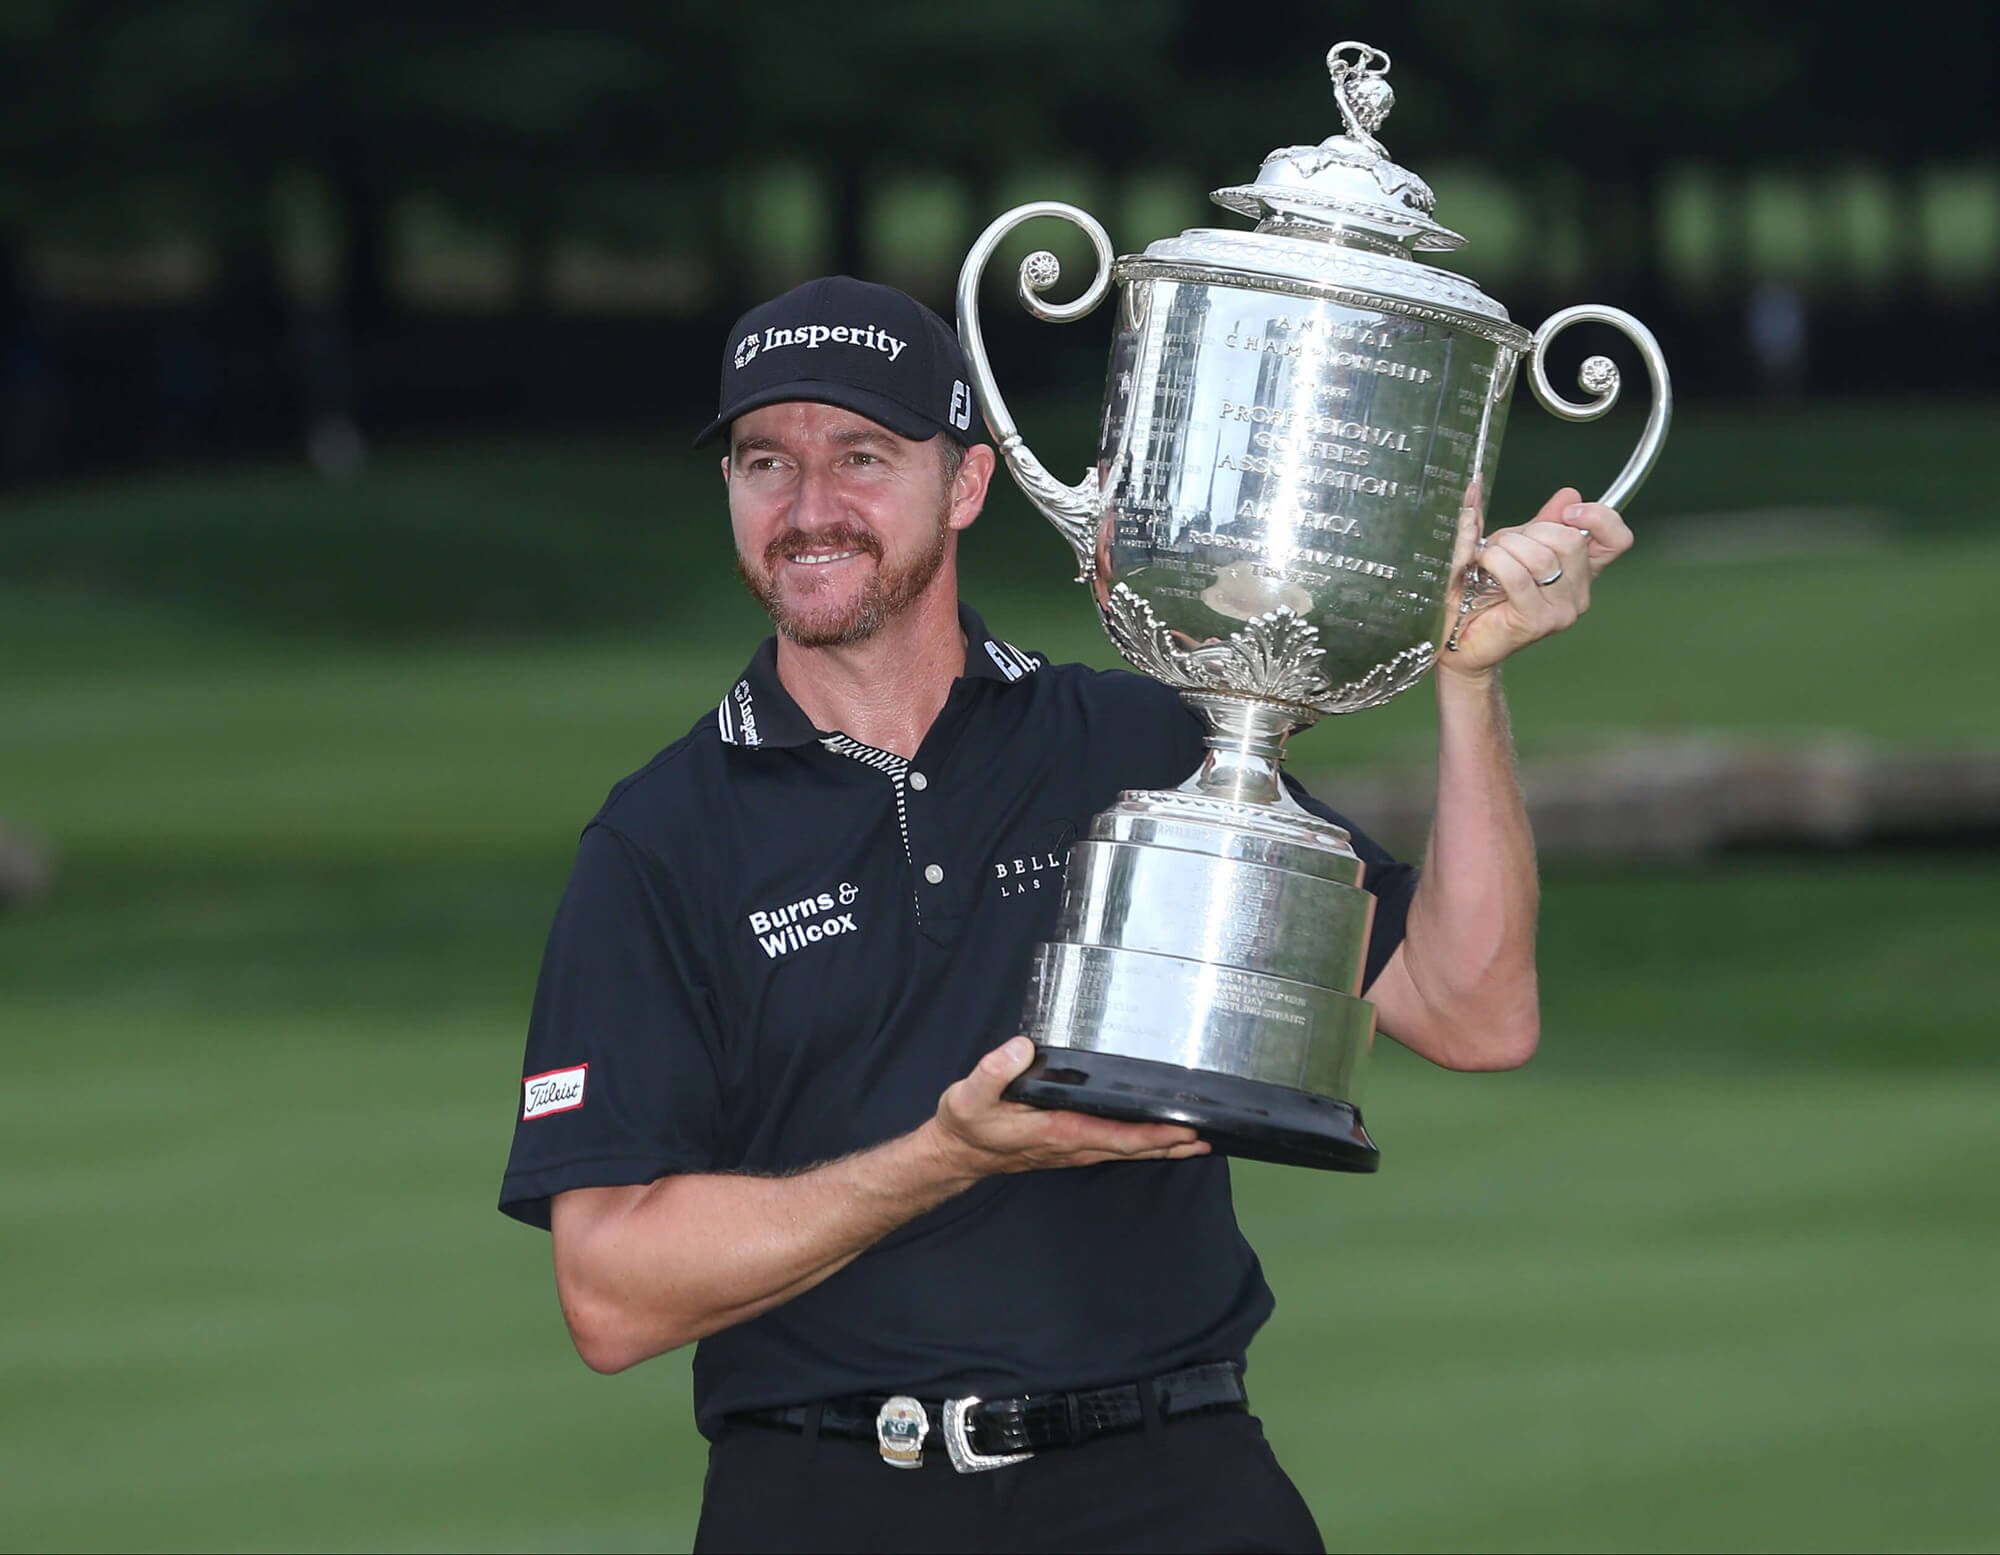 Image of Jimmy Walker with the trophy from PGA major.